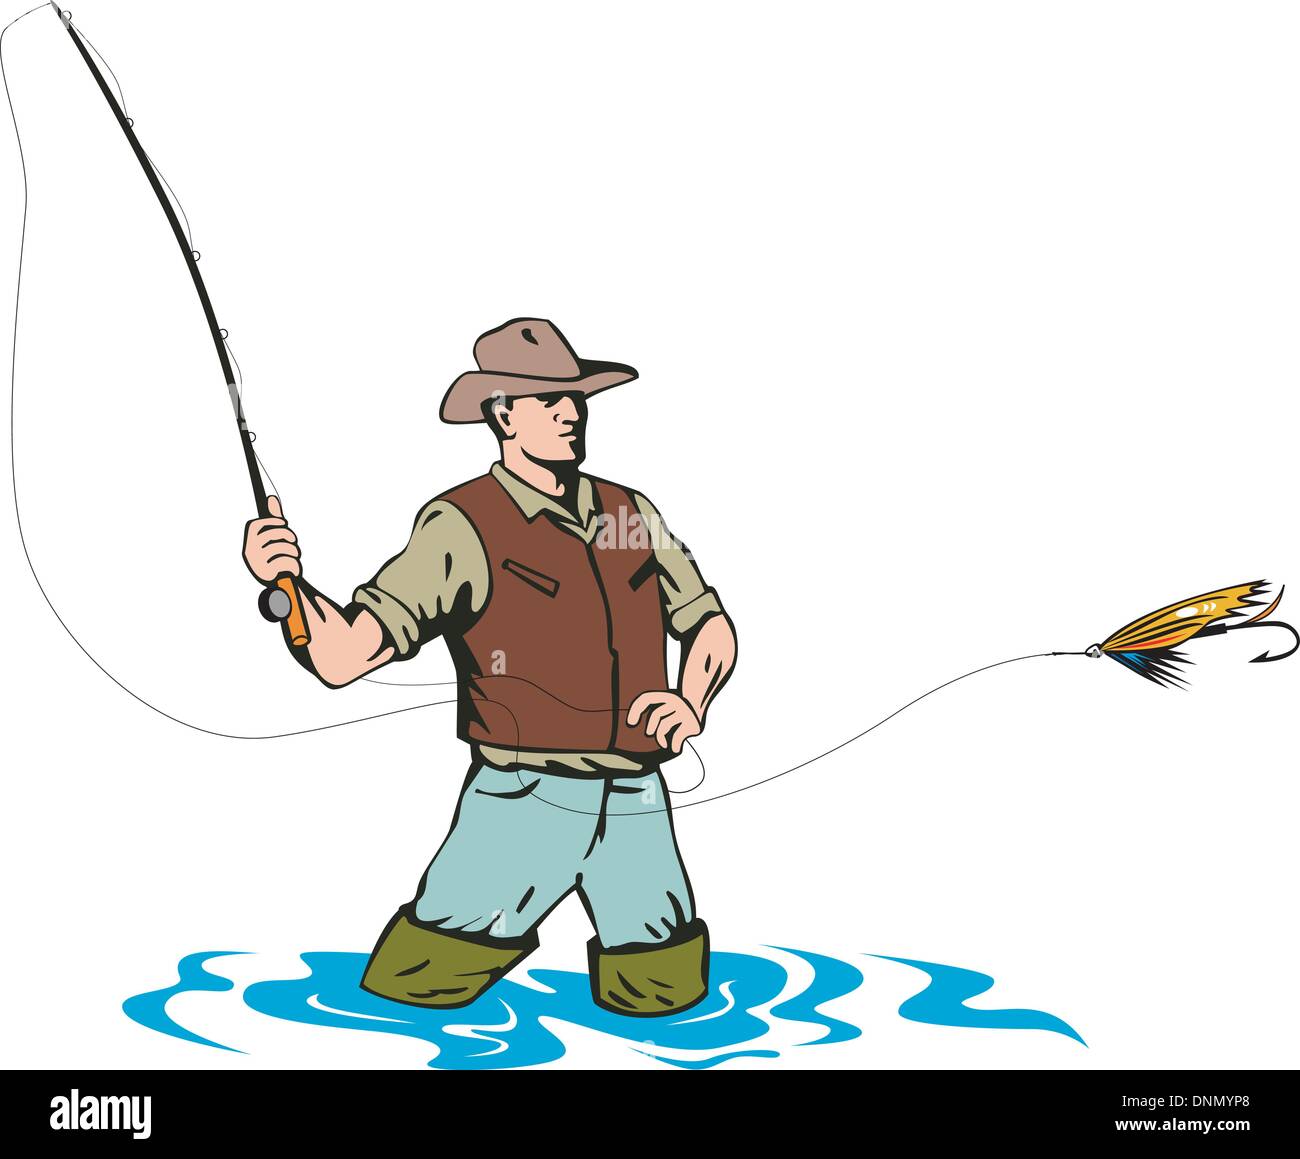 illustration of a fly fisherman casting rod and reel done in retro